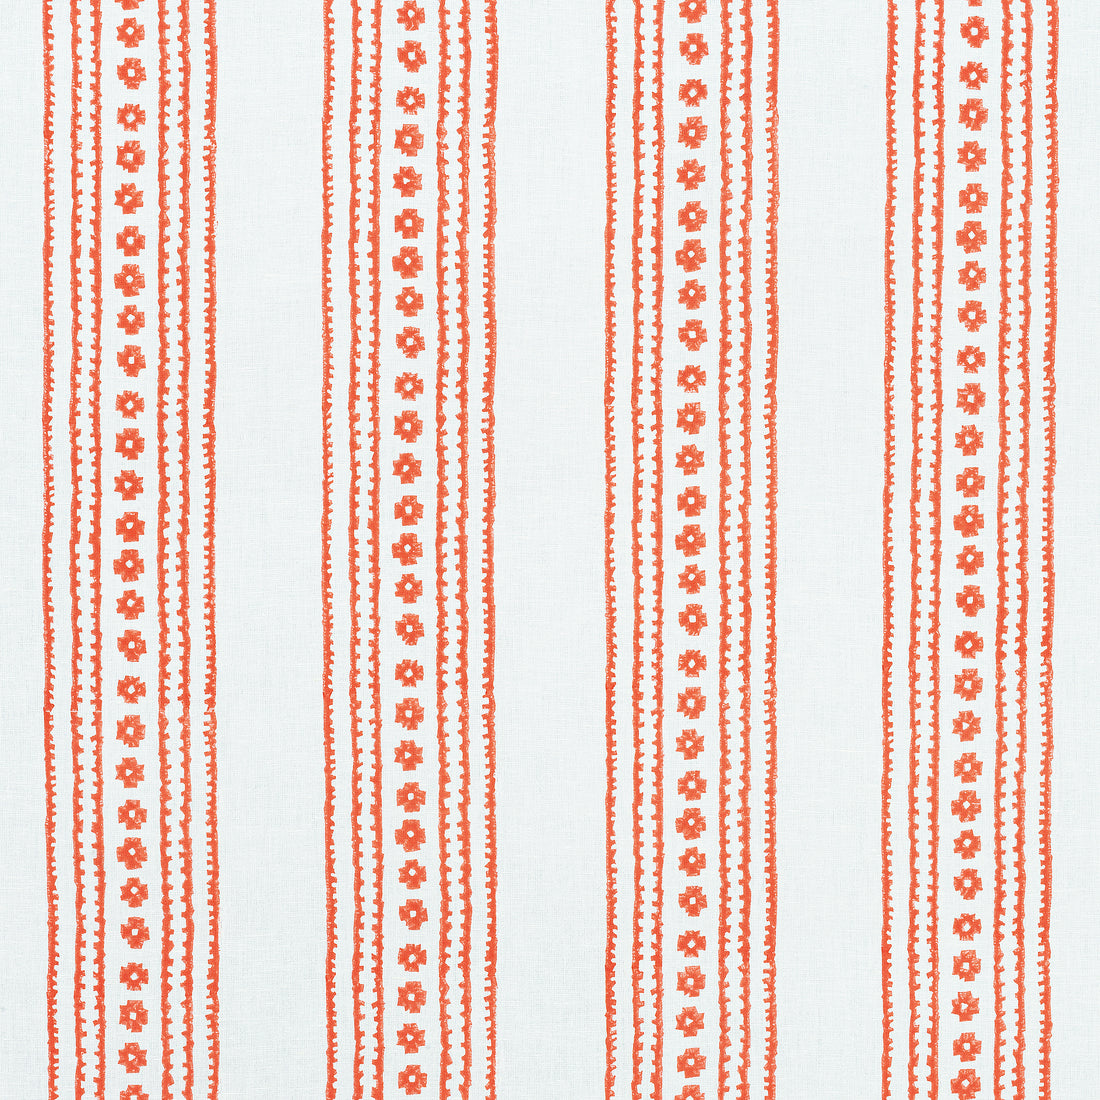 New Haven Stripe fabric in coral color - pattern number F910606 - by Thibaut in the Ceylon collection